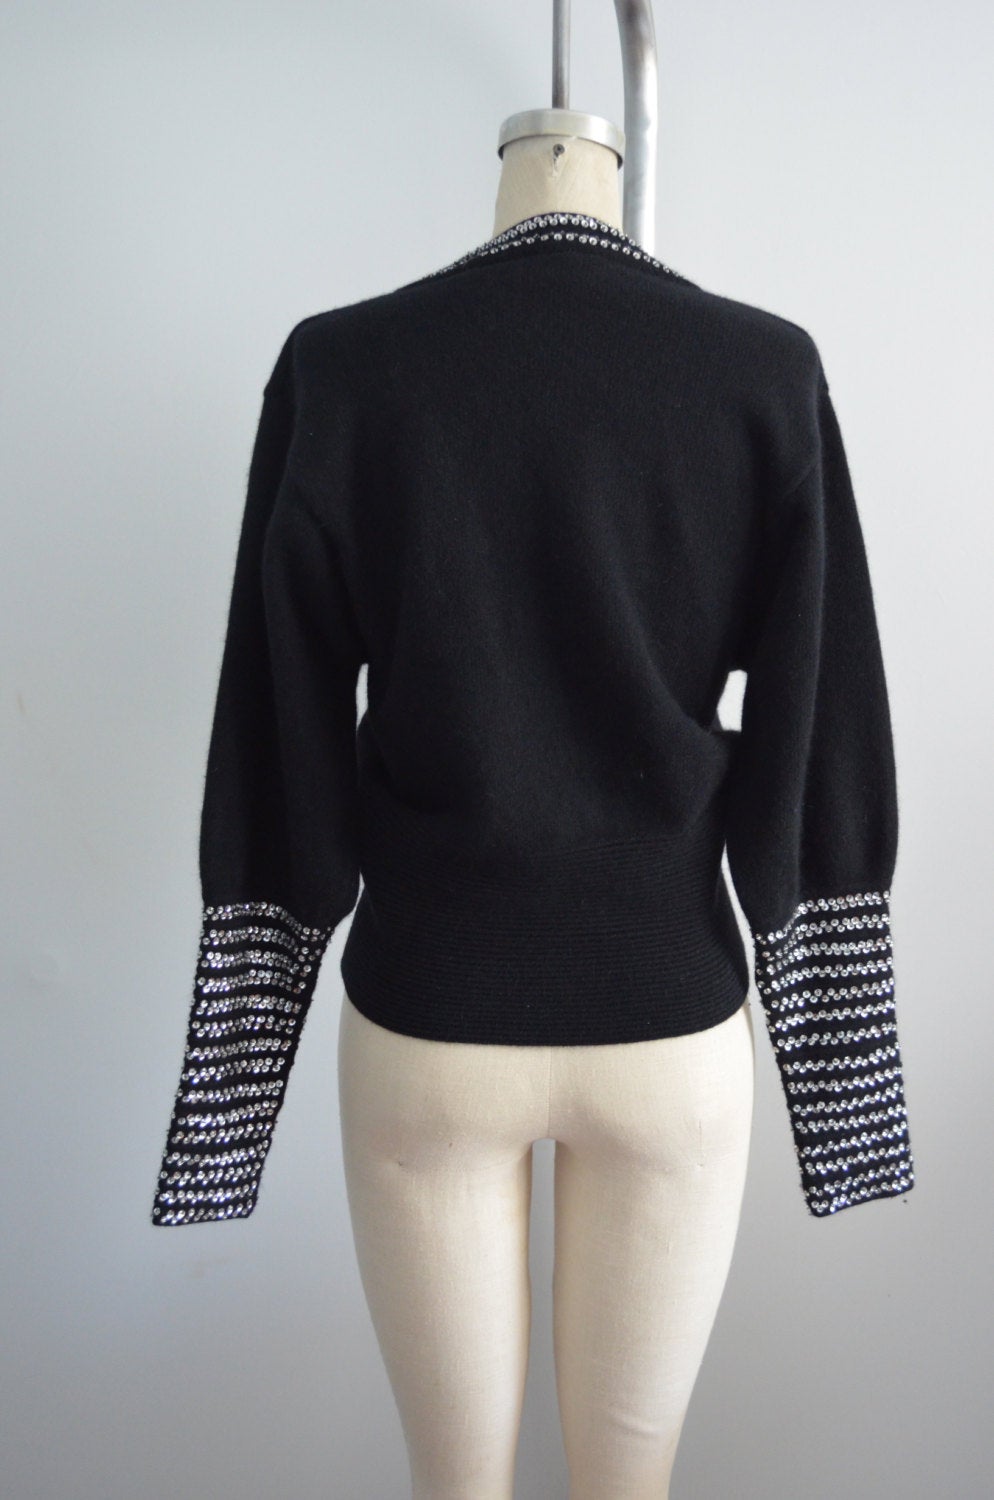 Lillie Rubin Sparkling Sequined Black Knit Long Sleeve Sweater